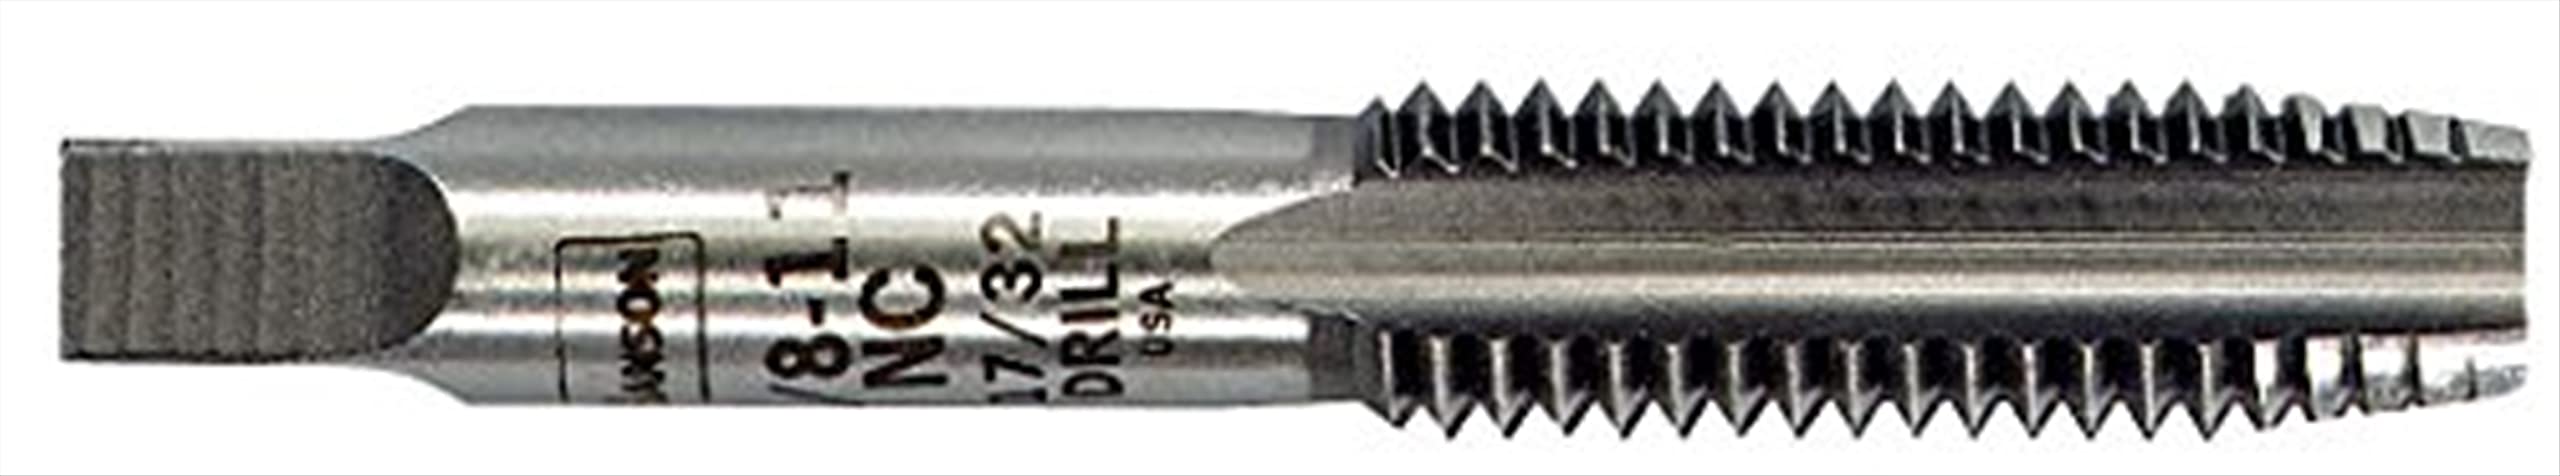 Irwin Tools Hanson 1452 Tap 5/8"-11 NC Plug, for Tap Die Extraction